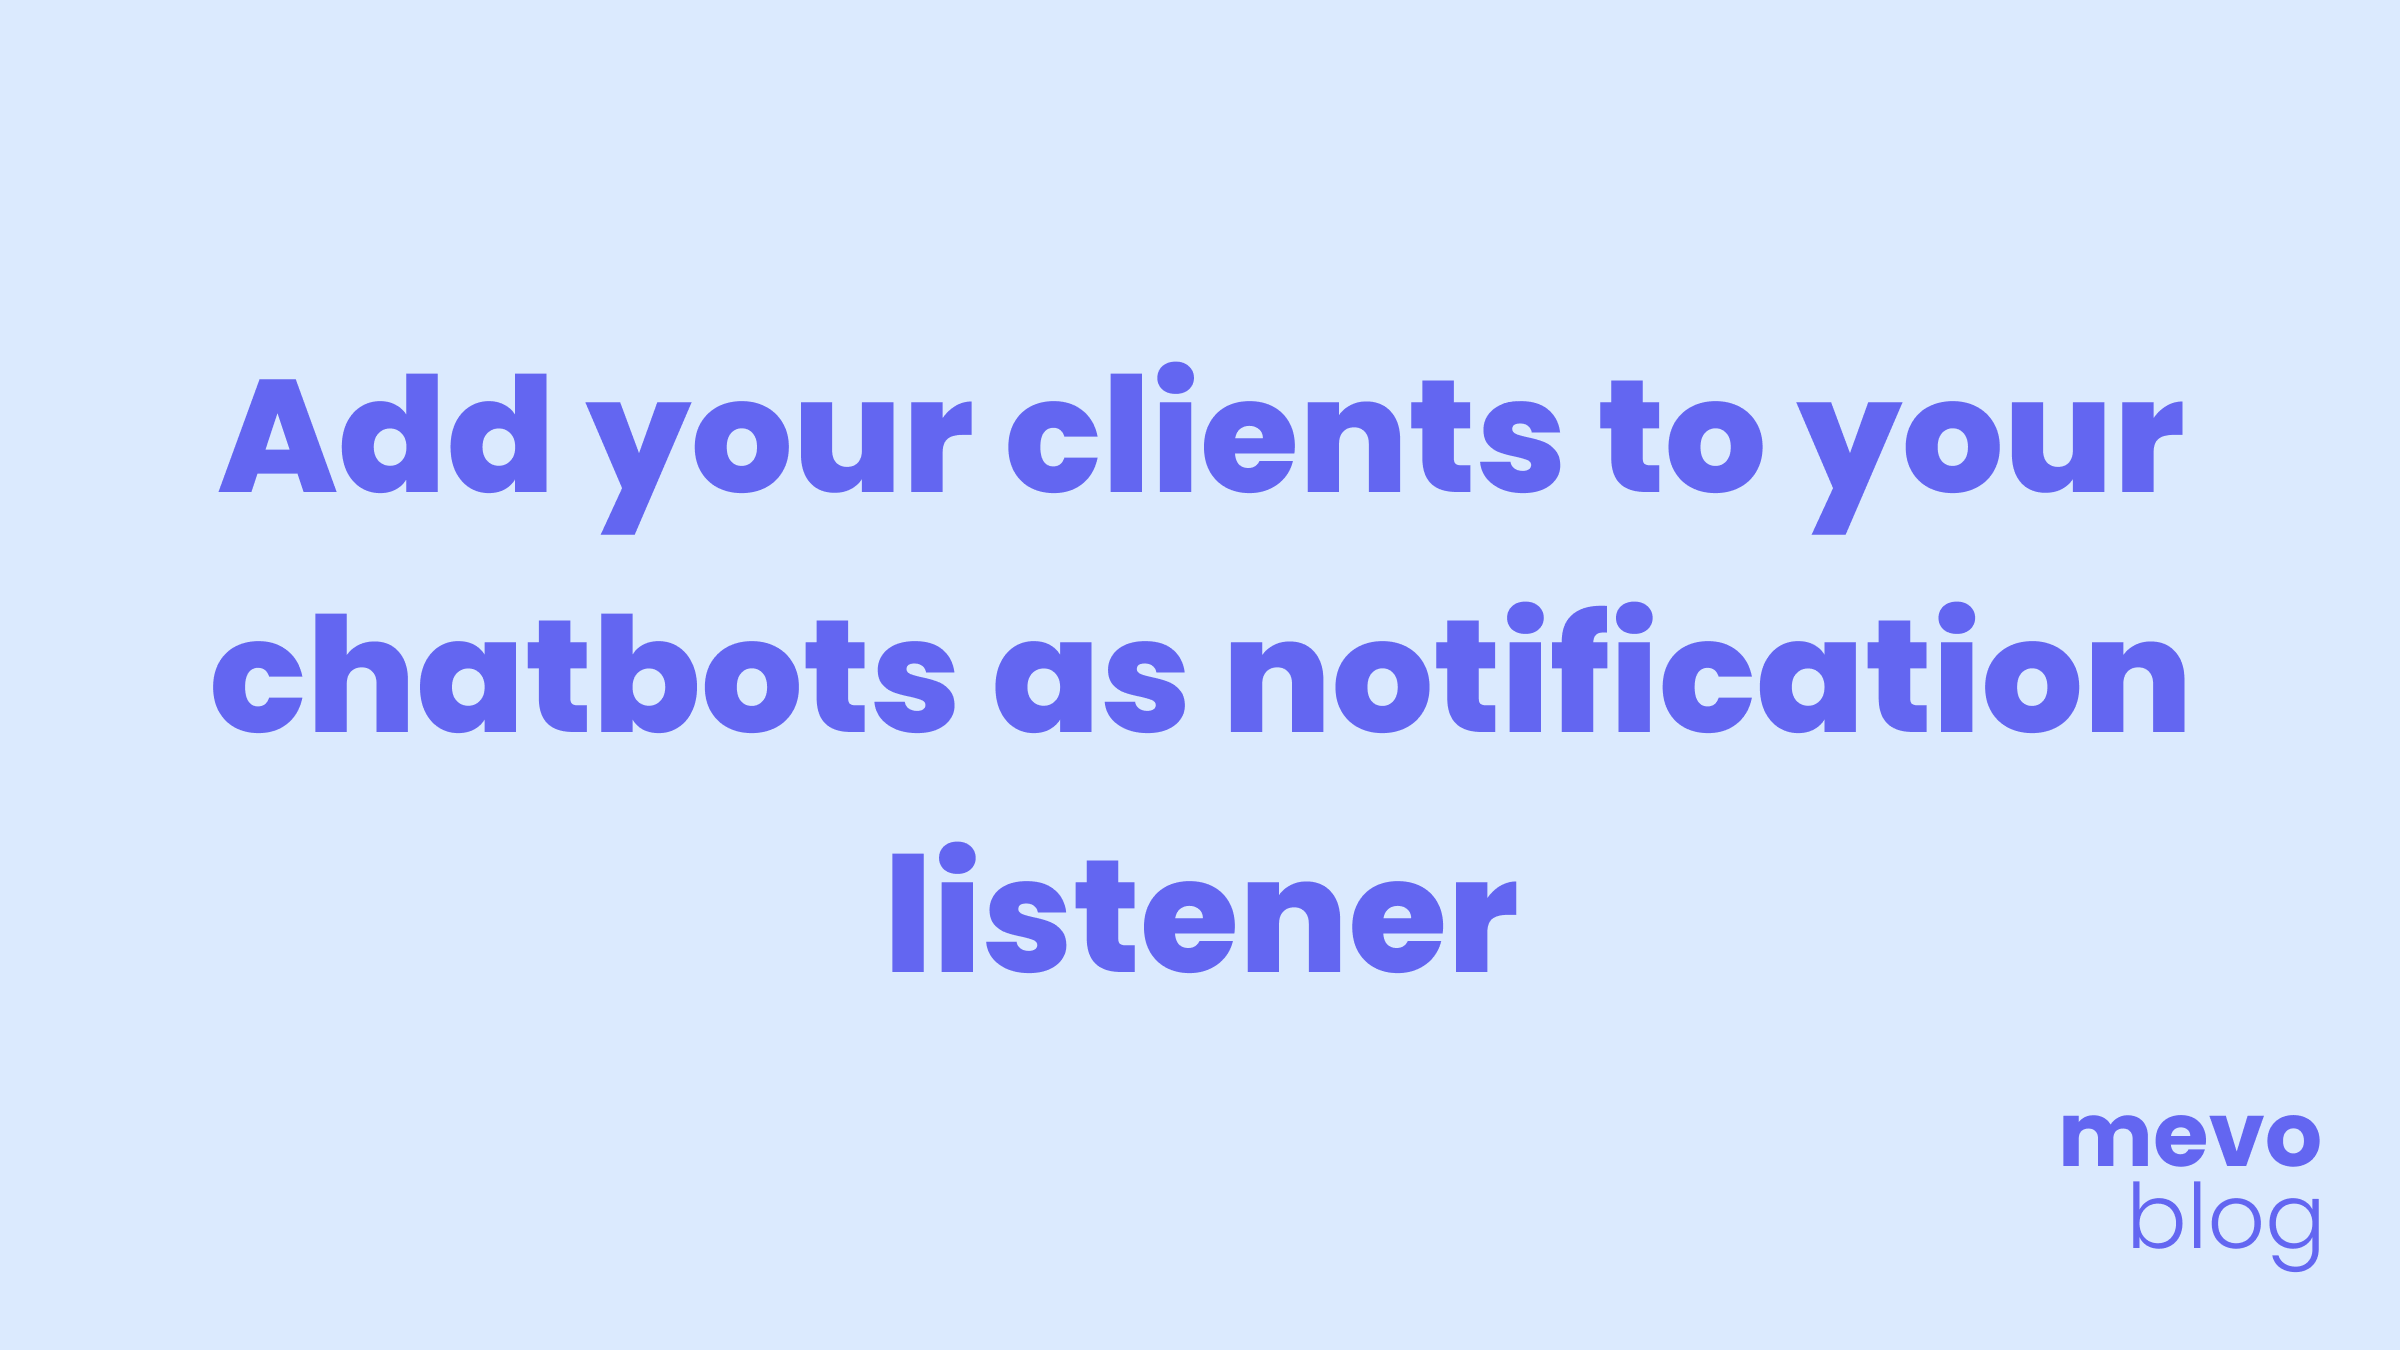 How do you send email notifications from the chatbot to your clients without giving them dashboard access?